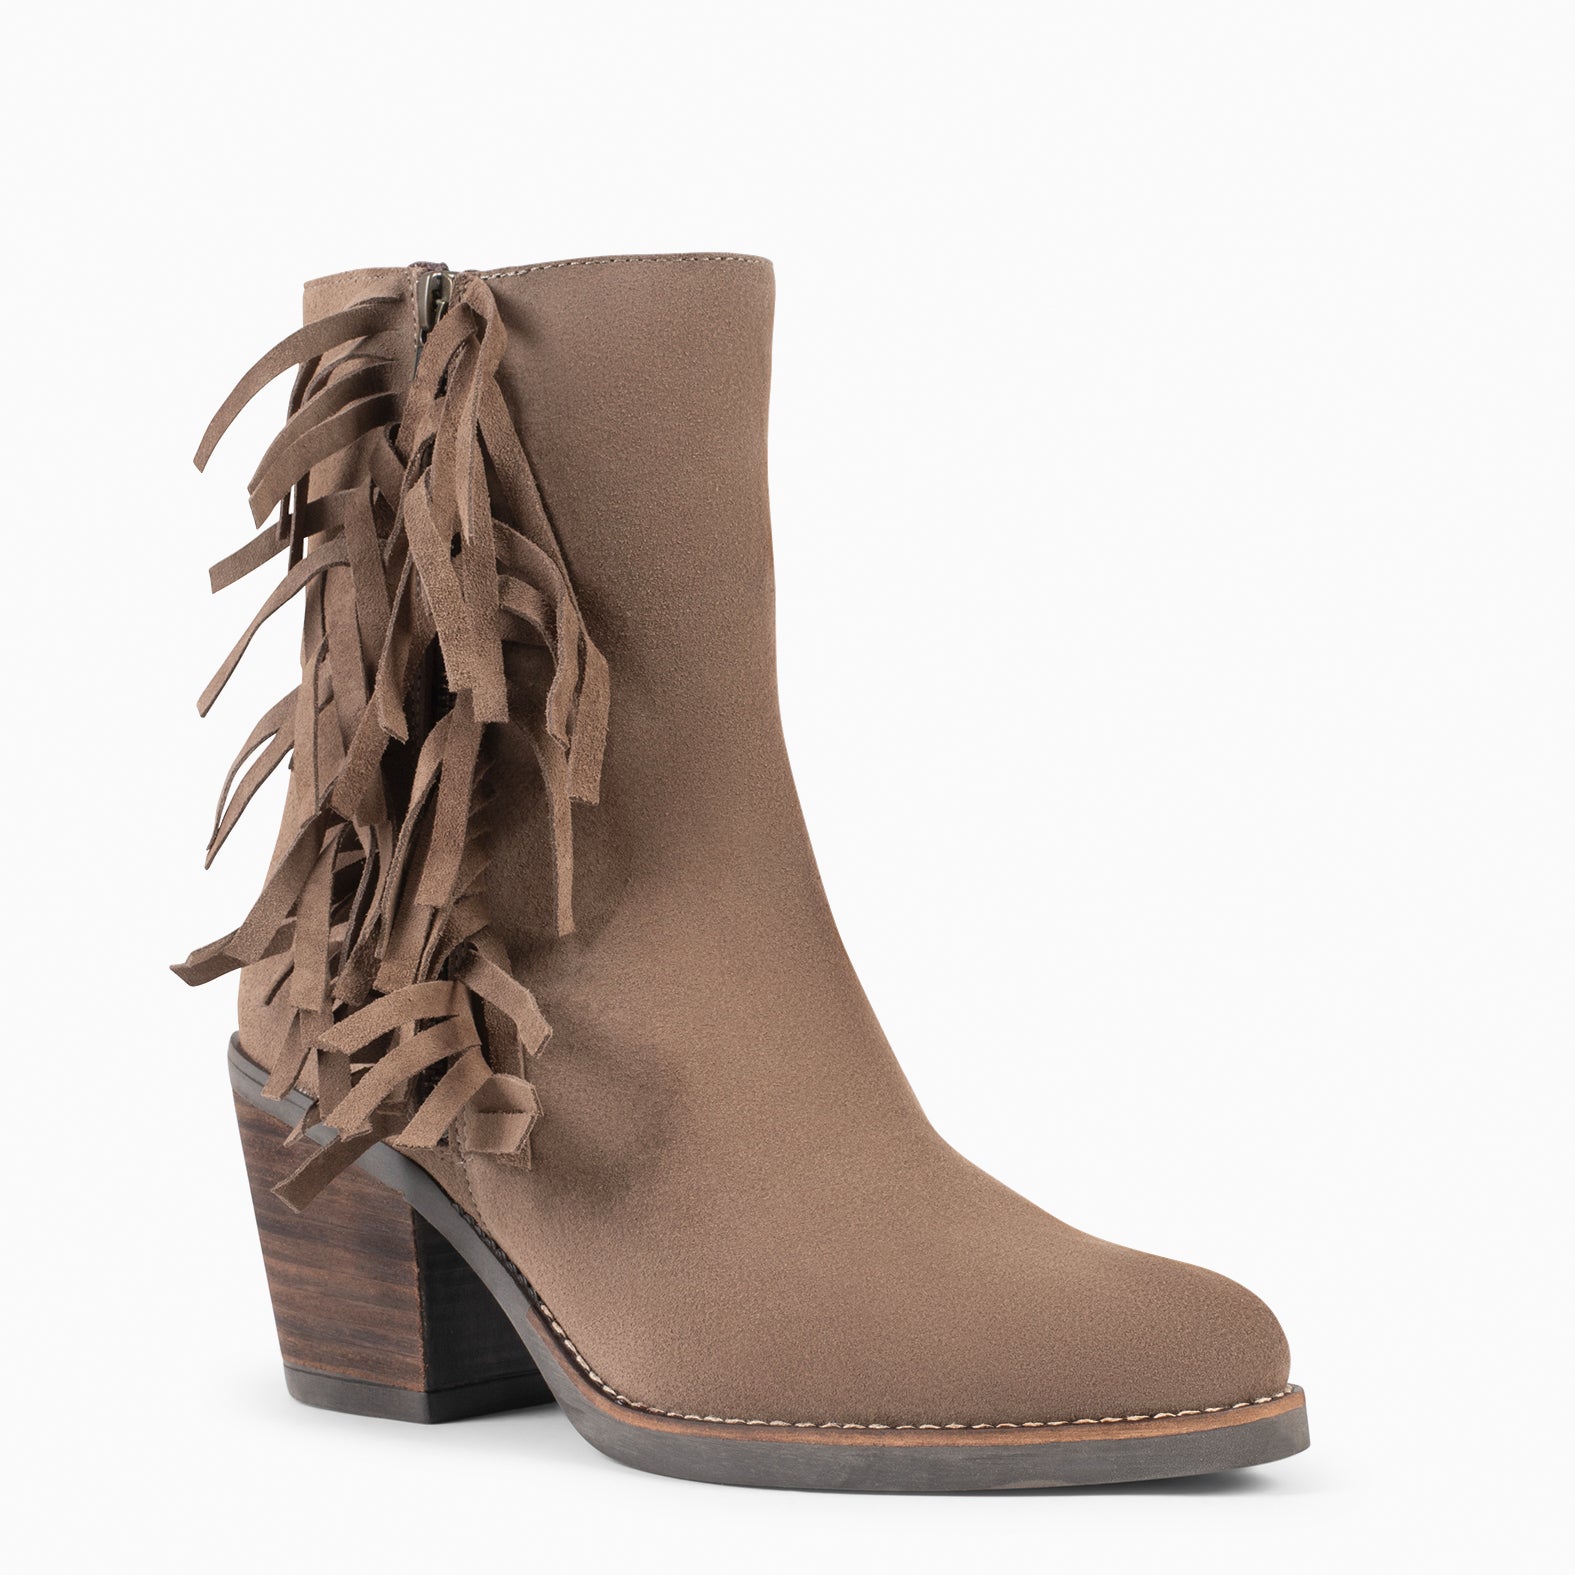 BOHO – TAUPE Women Booties with Fringes 